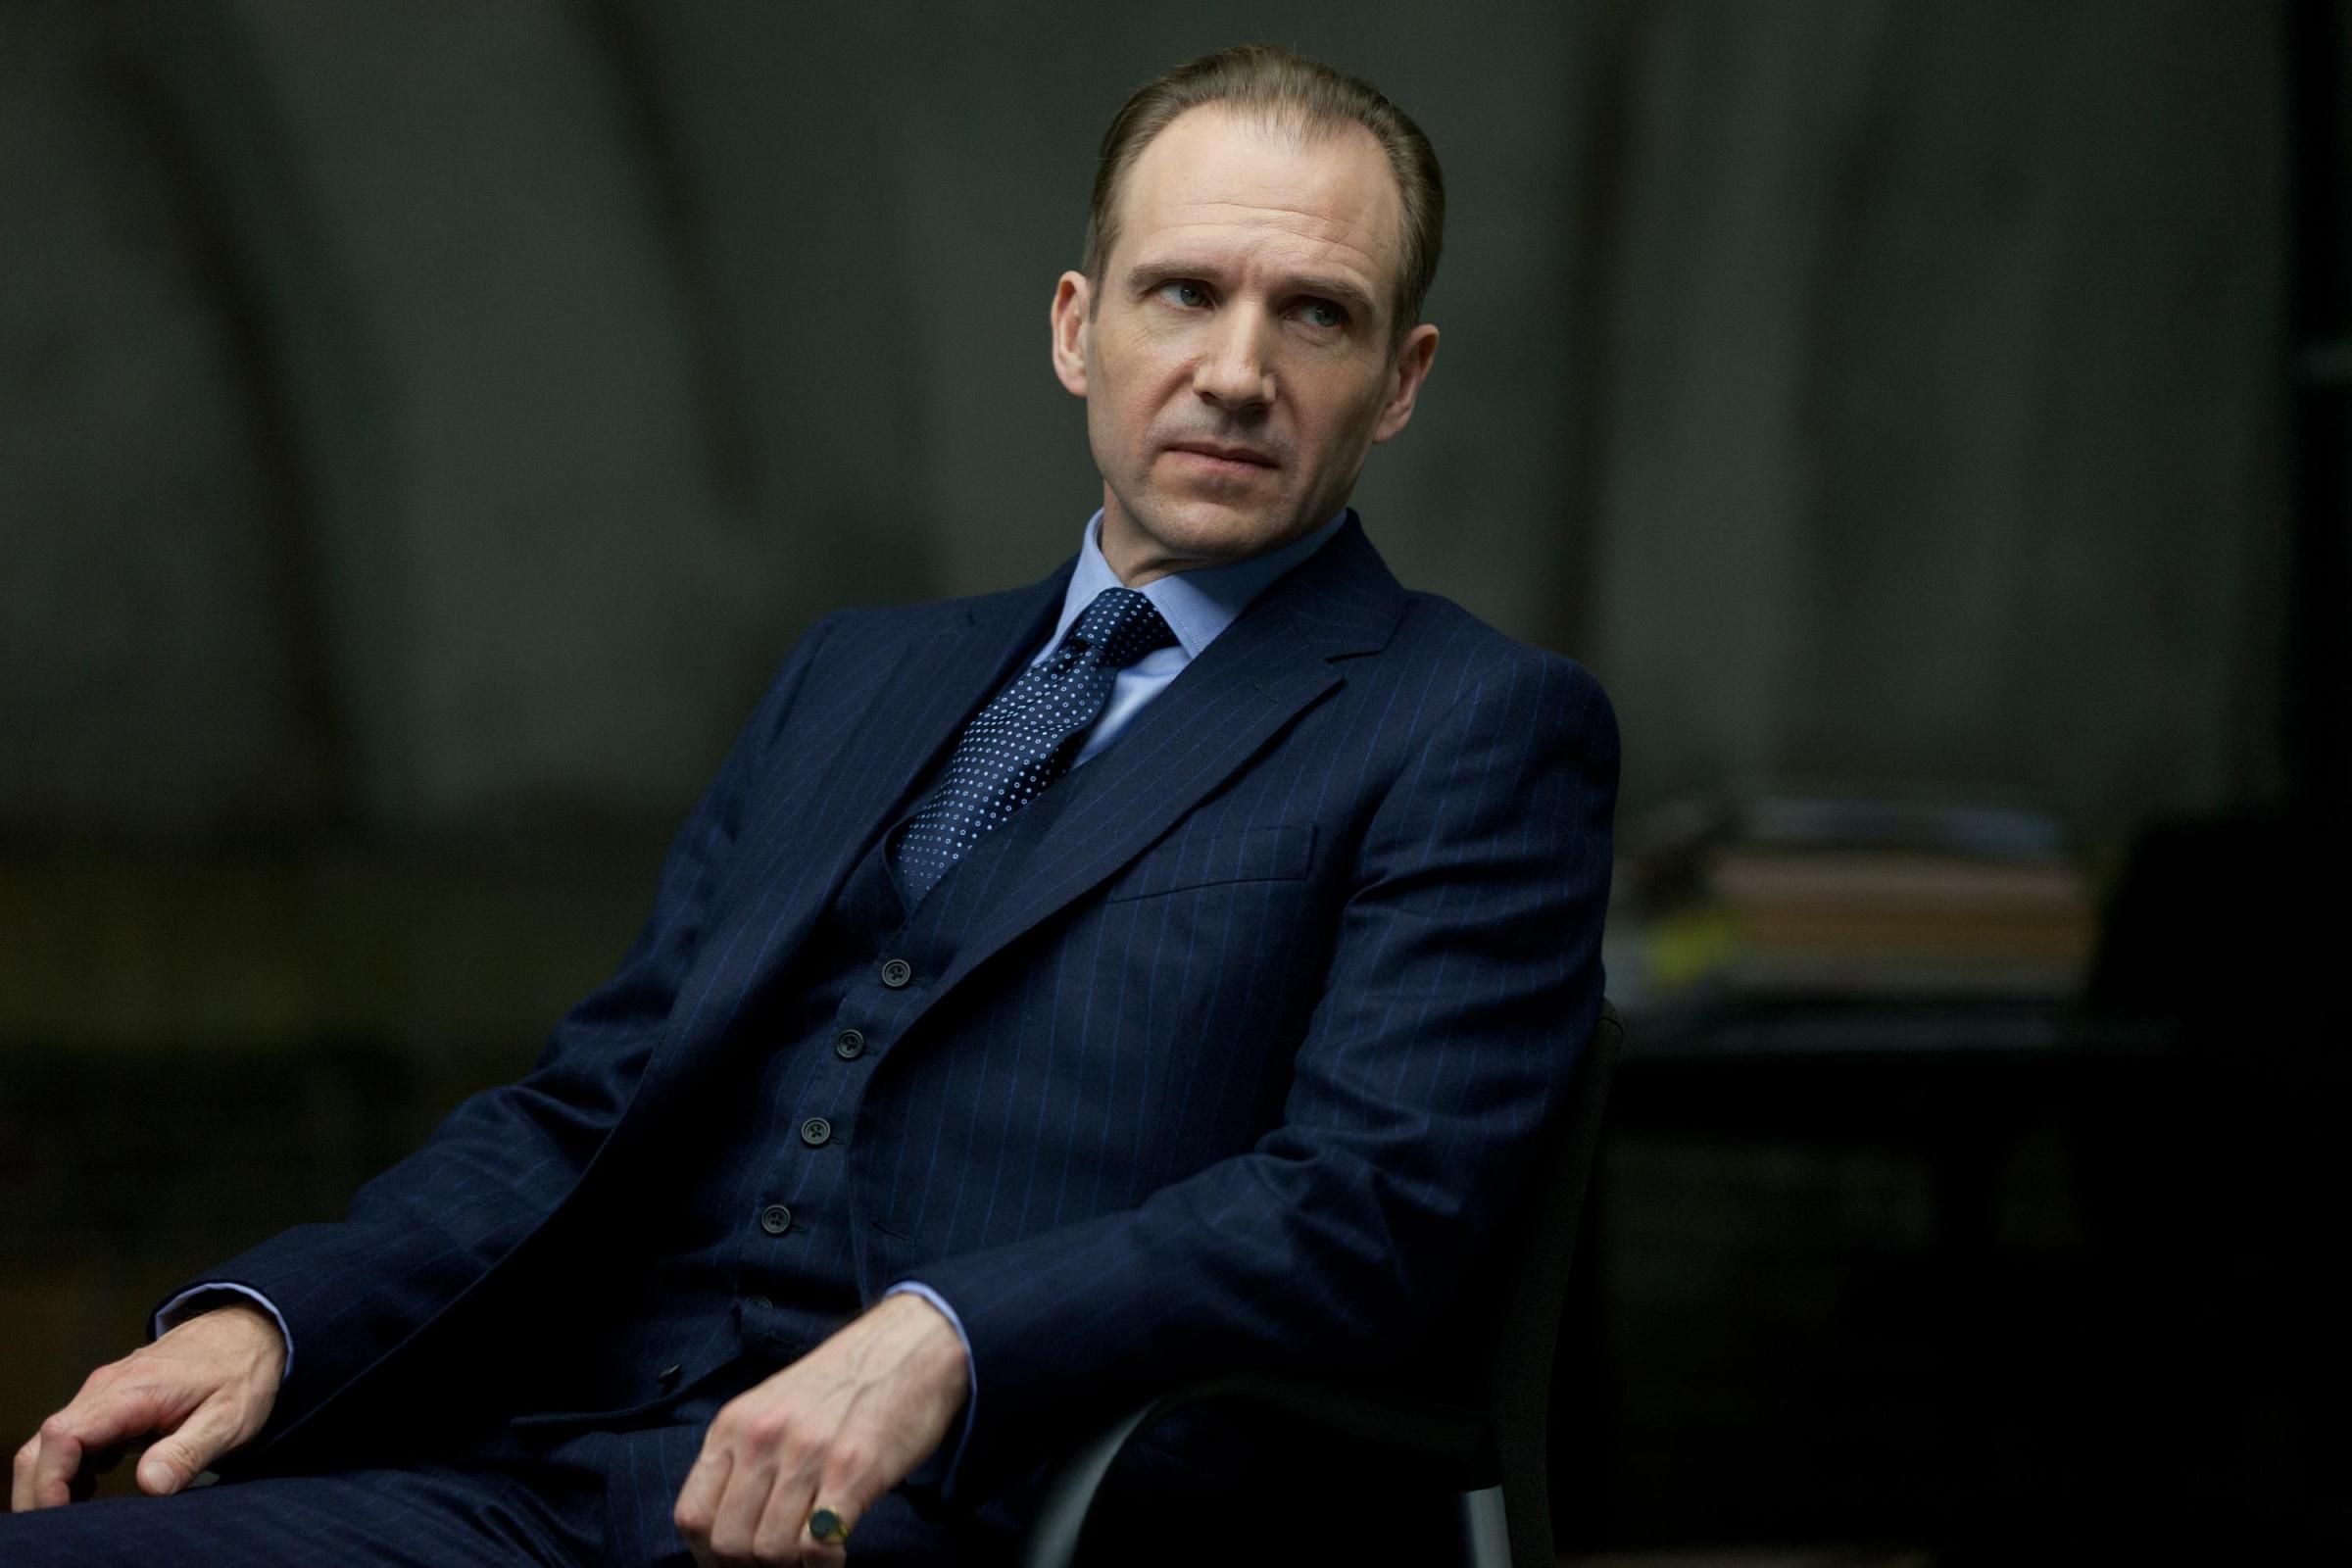 Ralph Fiennes as Gareth Mallory in Skyfall. (PA)